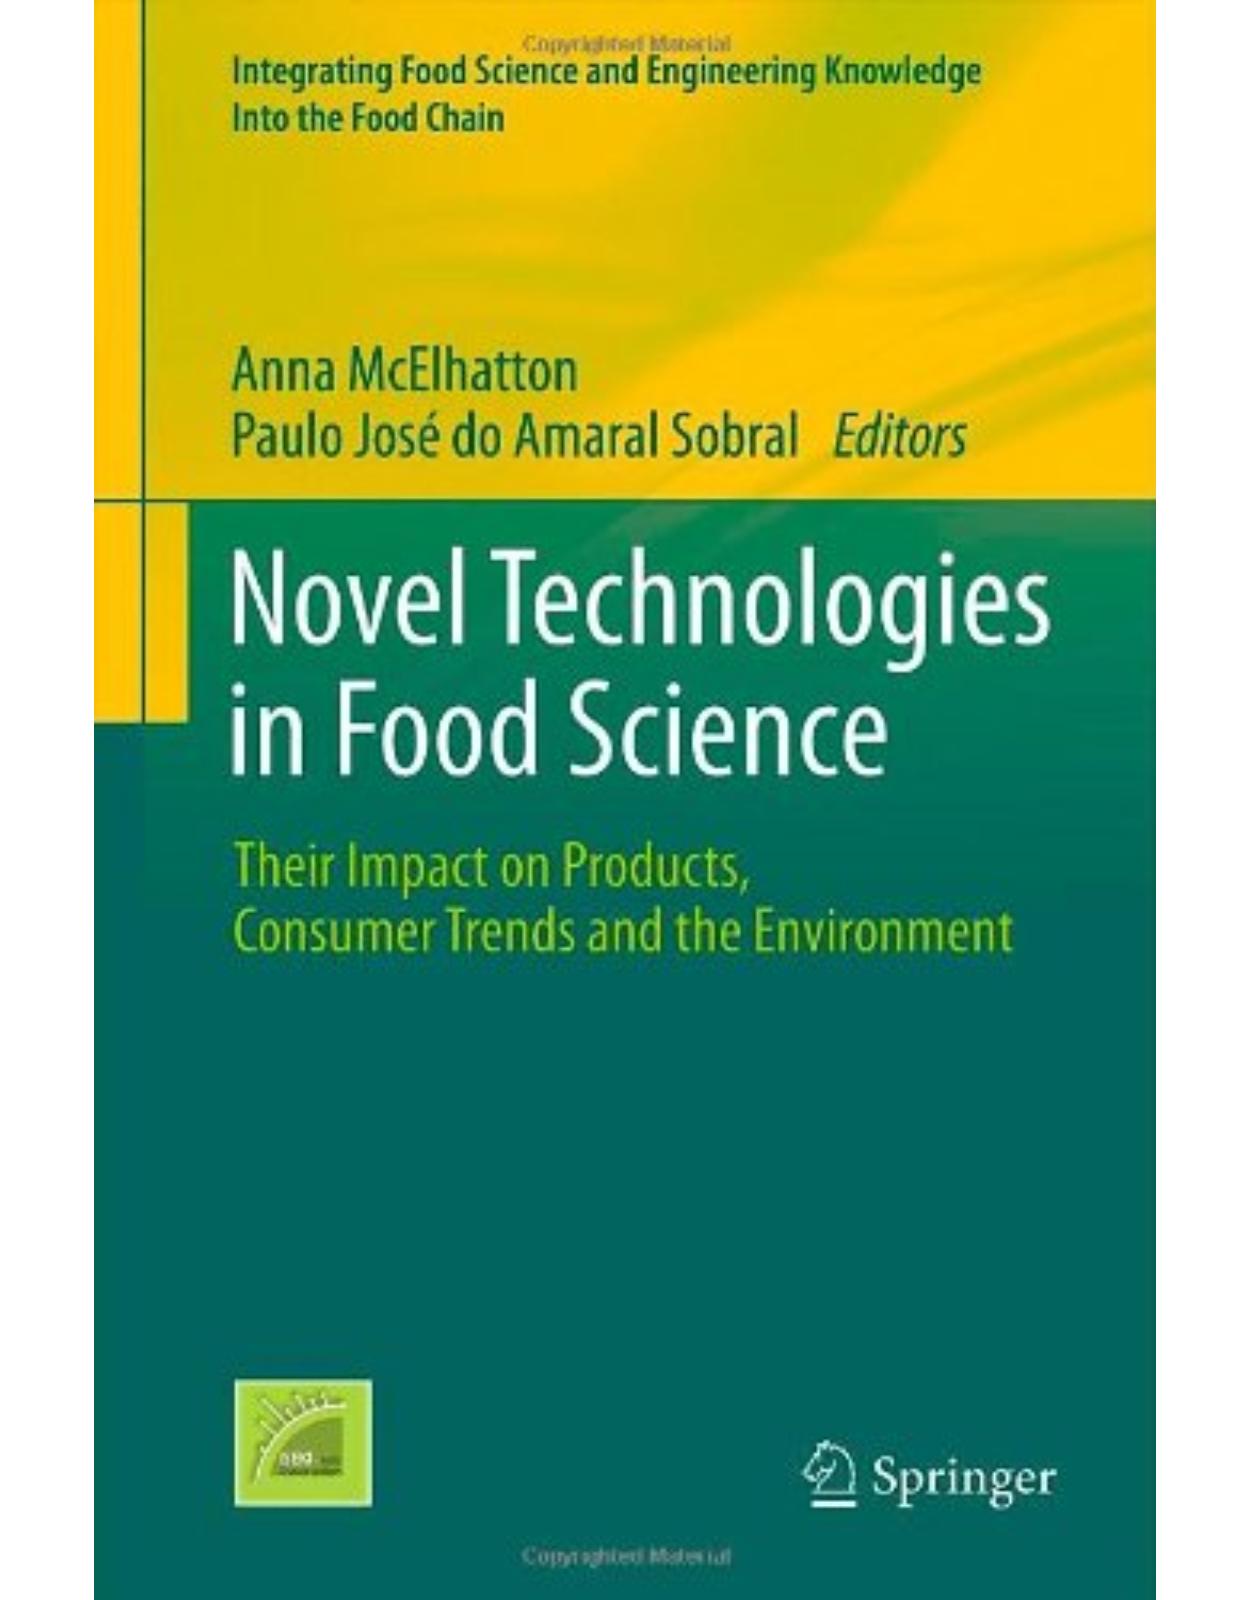 Novel Technologies in Food Science: Their Impact on Products, Consumer Trends and the Environment (Integrating Food Science and Engineering Knowledge Into the Food Chain)